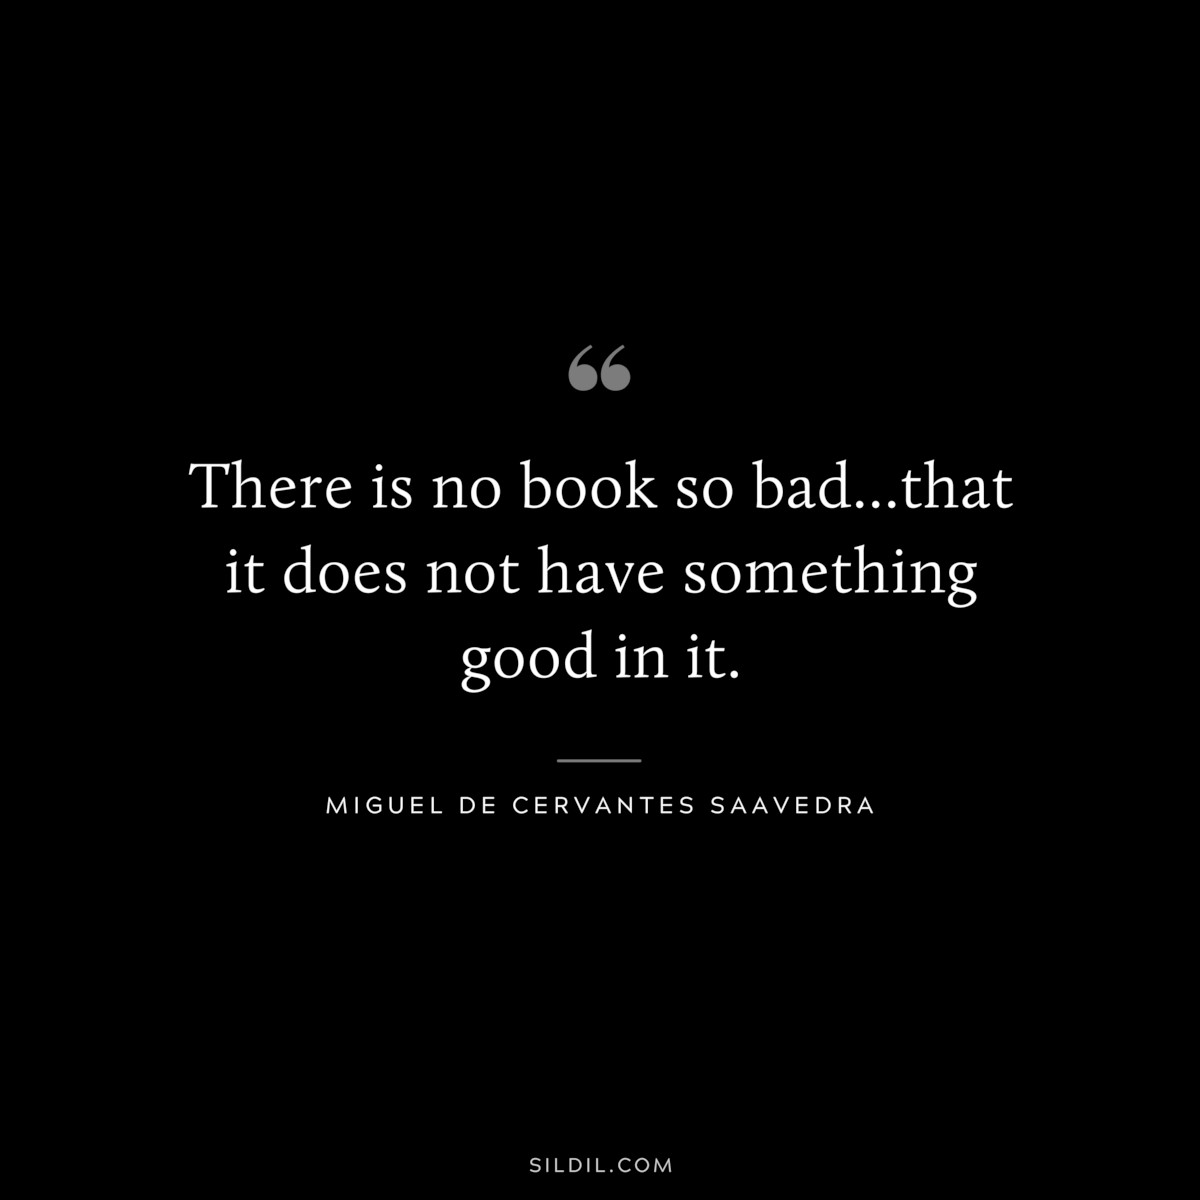 There is no book so bad...that it does not have something good in it. ― Miguel de Cervantes Saavedra